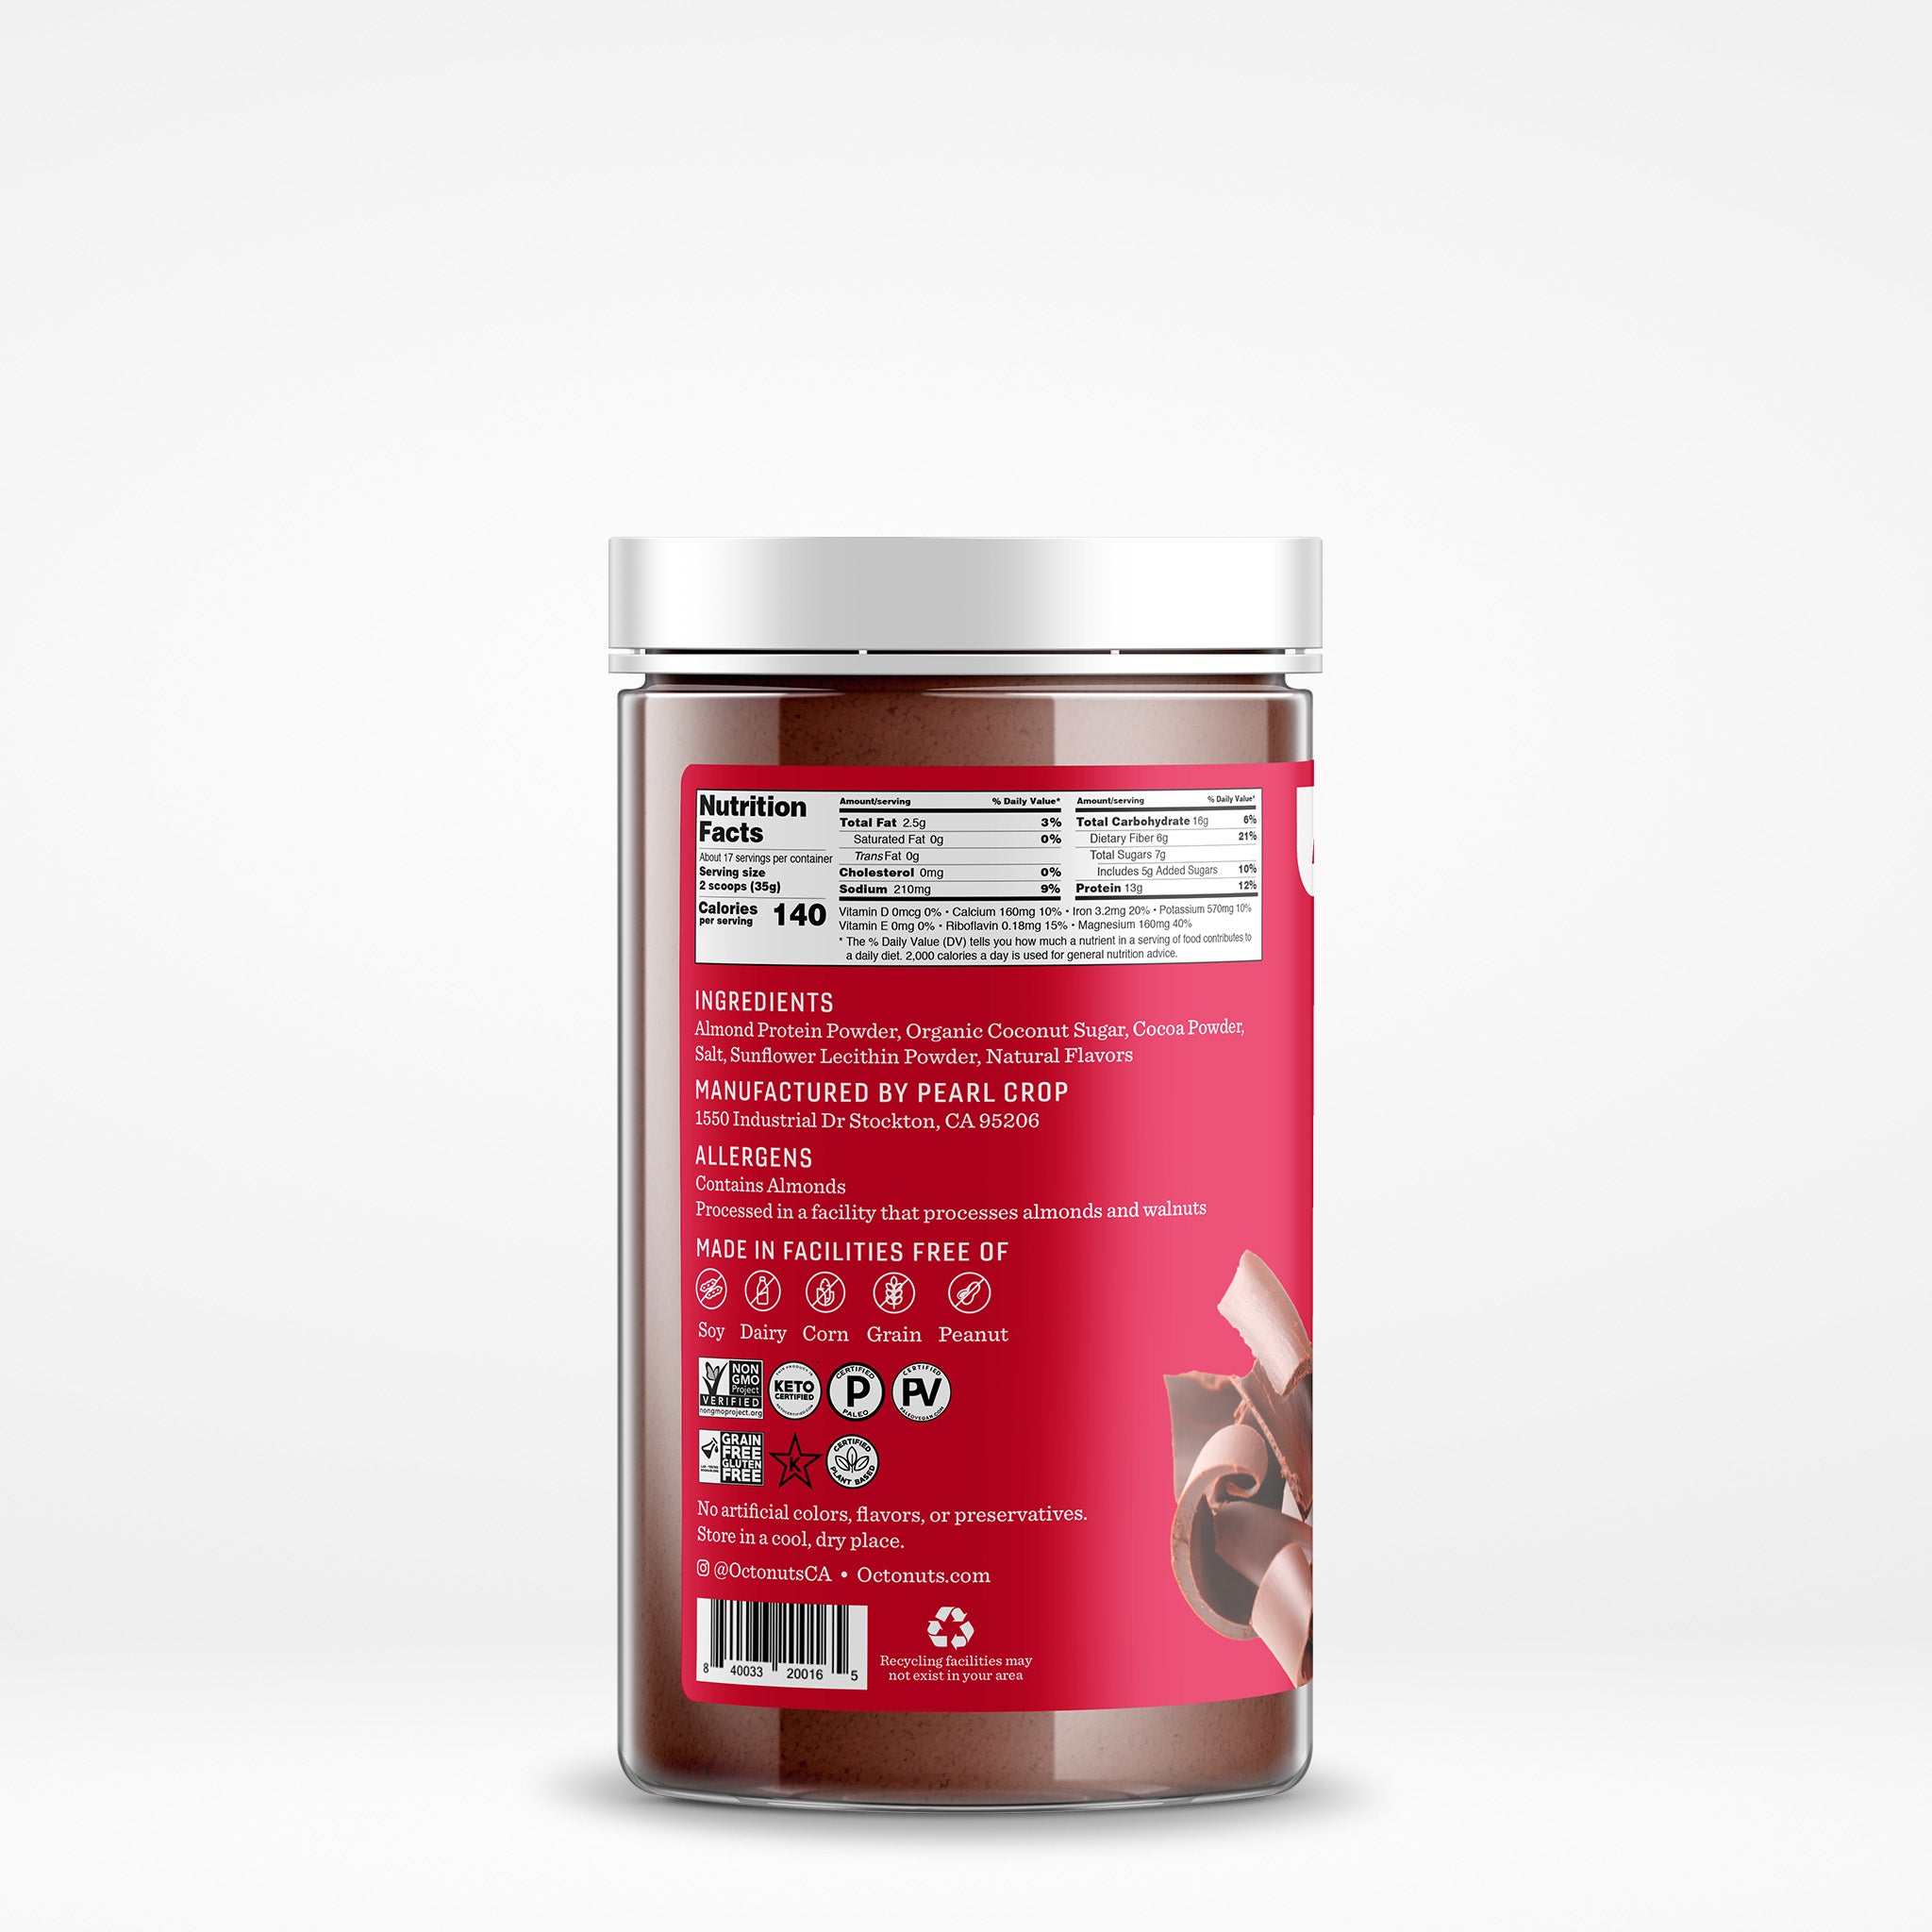 Chocolate Almond Protein Powder Octo-Pack